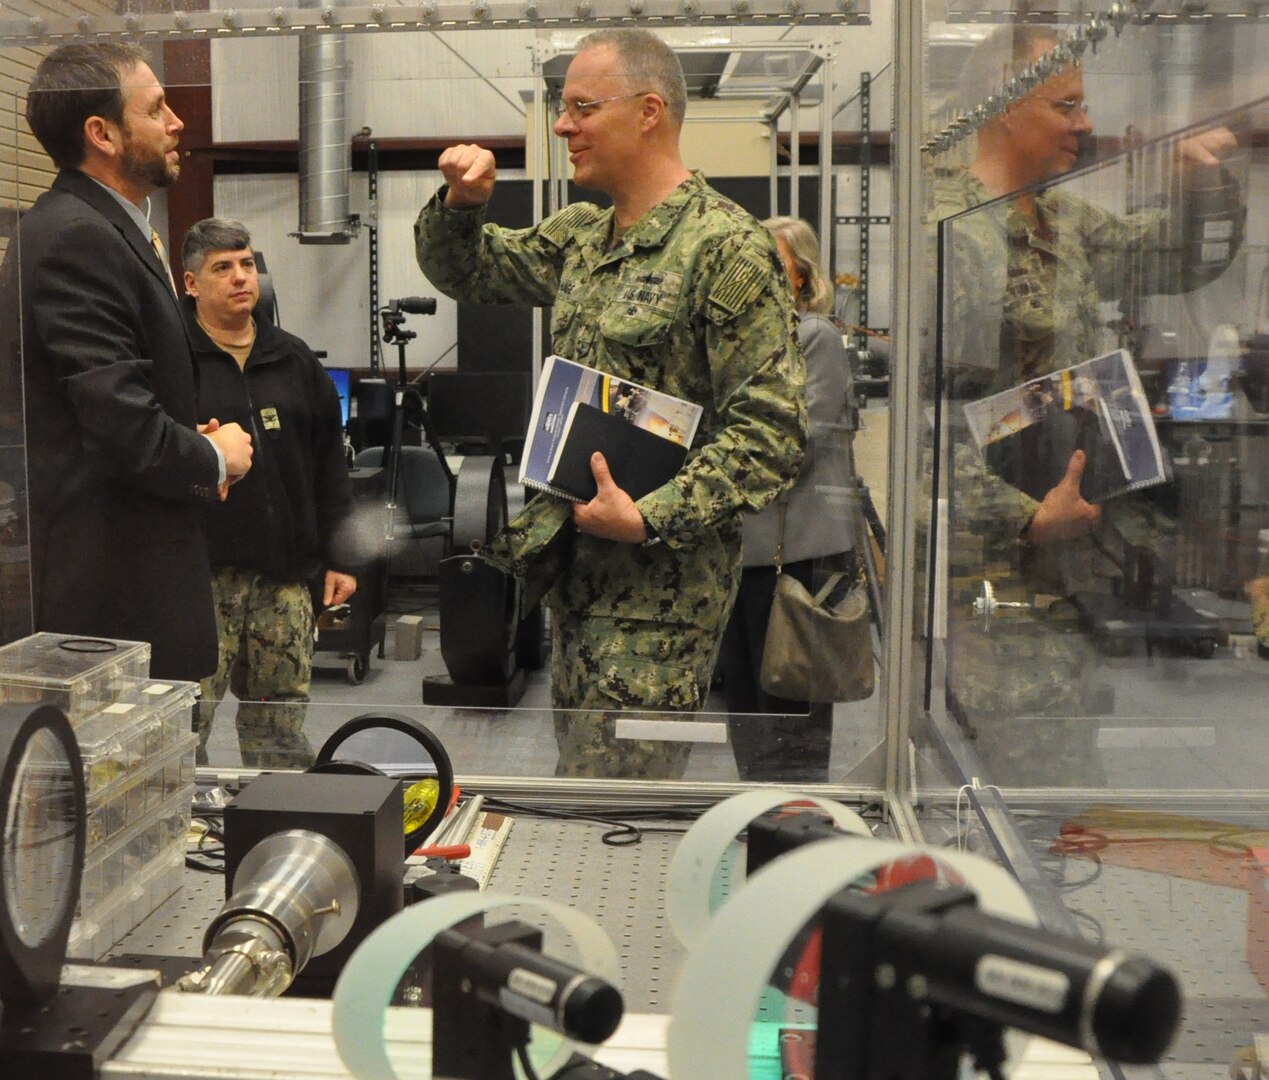 IMAGE: DAHLGREN, Va. (April 17, 2019) – Rear Adm. Eric Ver Hage – commander of the Naval Sea System Command (NAVSEA) Warfare Centers – discusses high energy laser testing with Dr. Chris Lloyd, High Energy Laser Lethality lead at Naval Surface Warfare Center Dahlgren Division (NSWCDD). Lloyd emphasized that lethality lab efforts – including rigorous modeling and testing against target materials to ensure high energy laser systems meet warfighter requirements – are growing while keeping pace with an increased demand signal for fielded high energy laser weapons. Meanwhile, Lloyd’s team is coordinating and collaborating with organizations throughout the Department of Defense and elsewhere to accomplish common goals. Pictured at the NSWCDD Laser Lethality Laboratory left to right are Lloyd, Capt. Andrew Arnold, NSWC chief of staff, and Ver Hage.